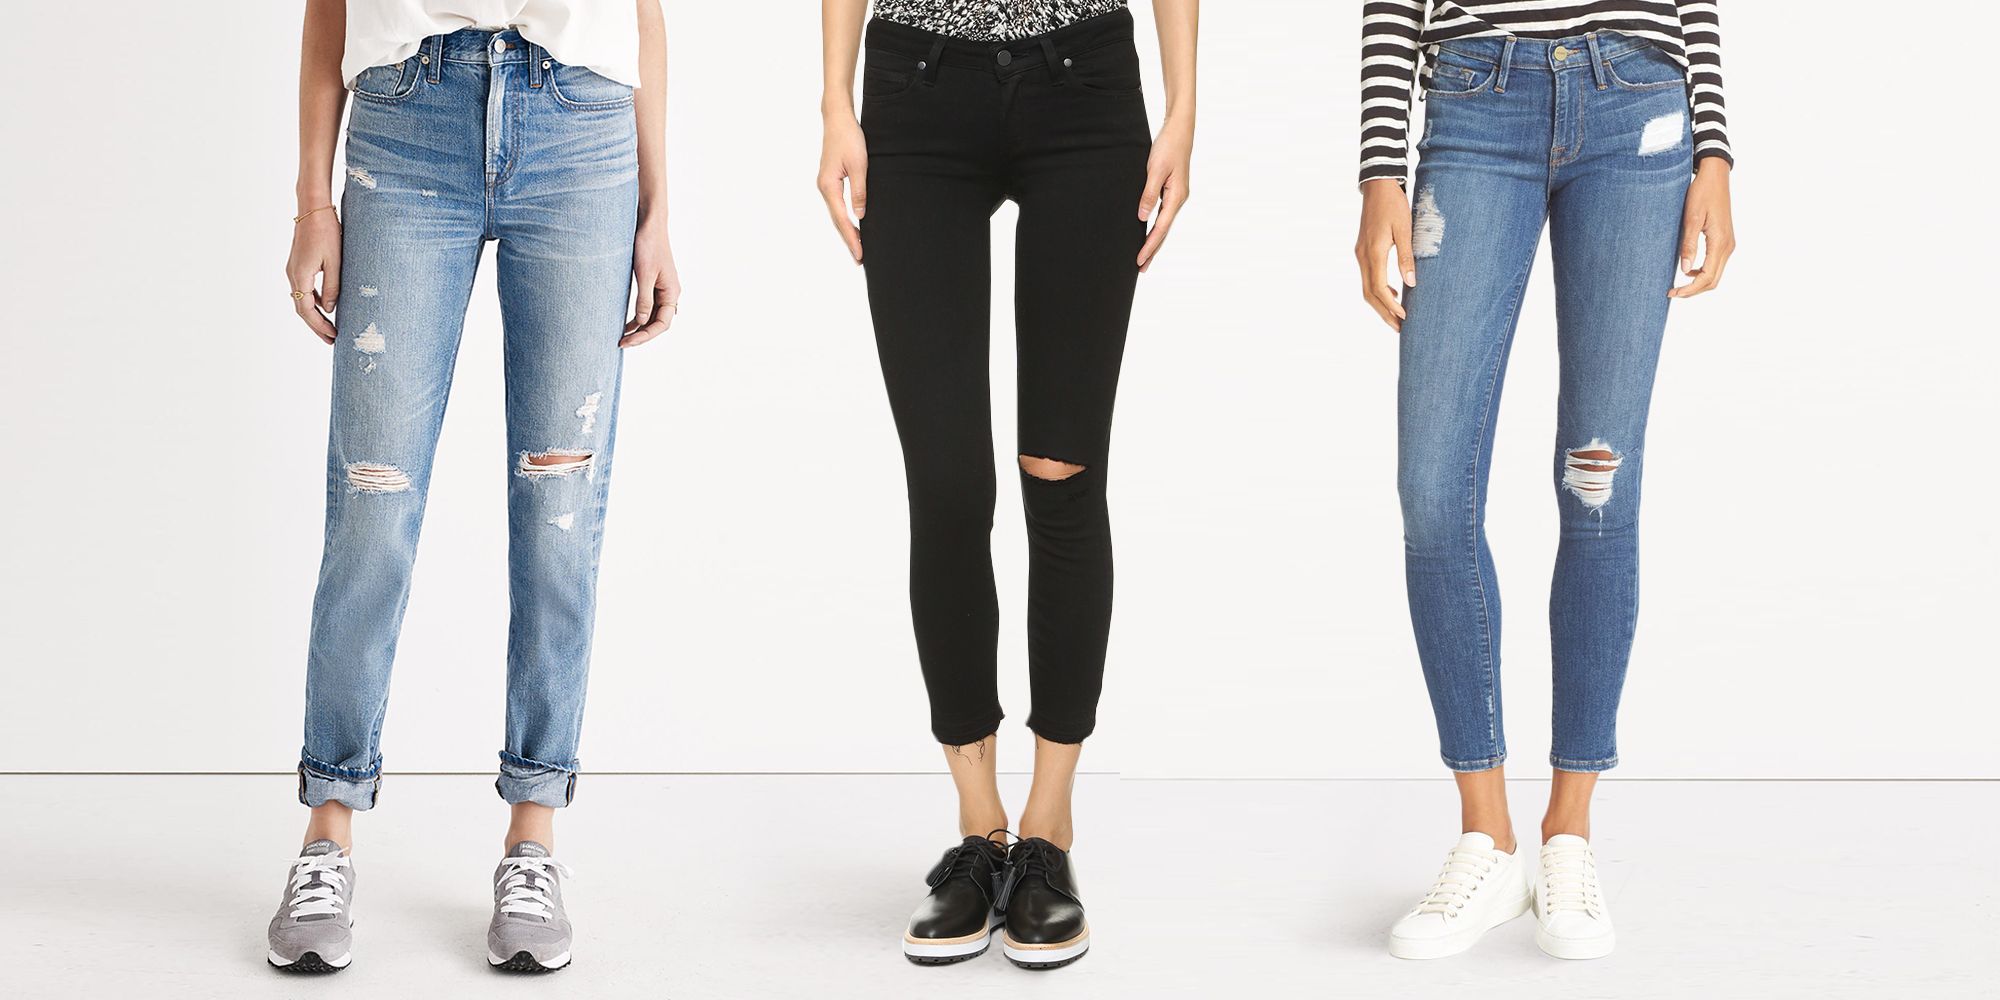 9 Best Distressed Jeans for 2018 - Ripped Jeans and Distressed